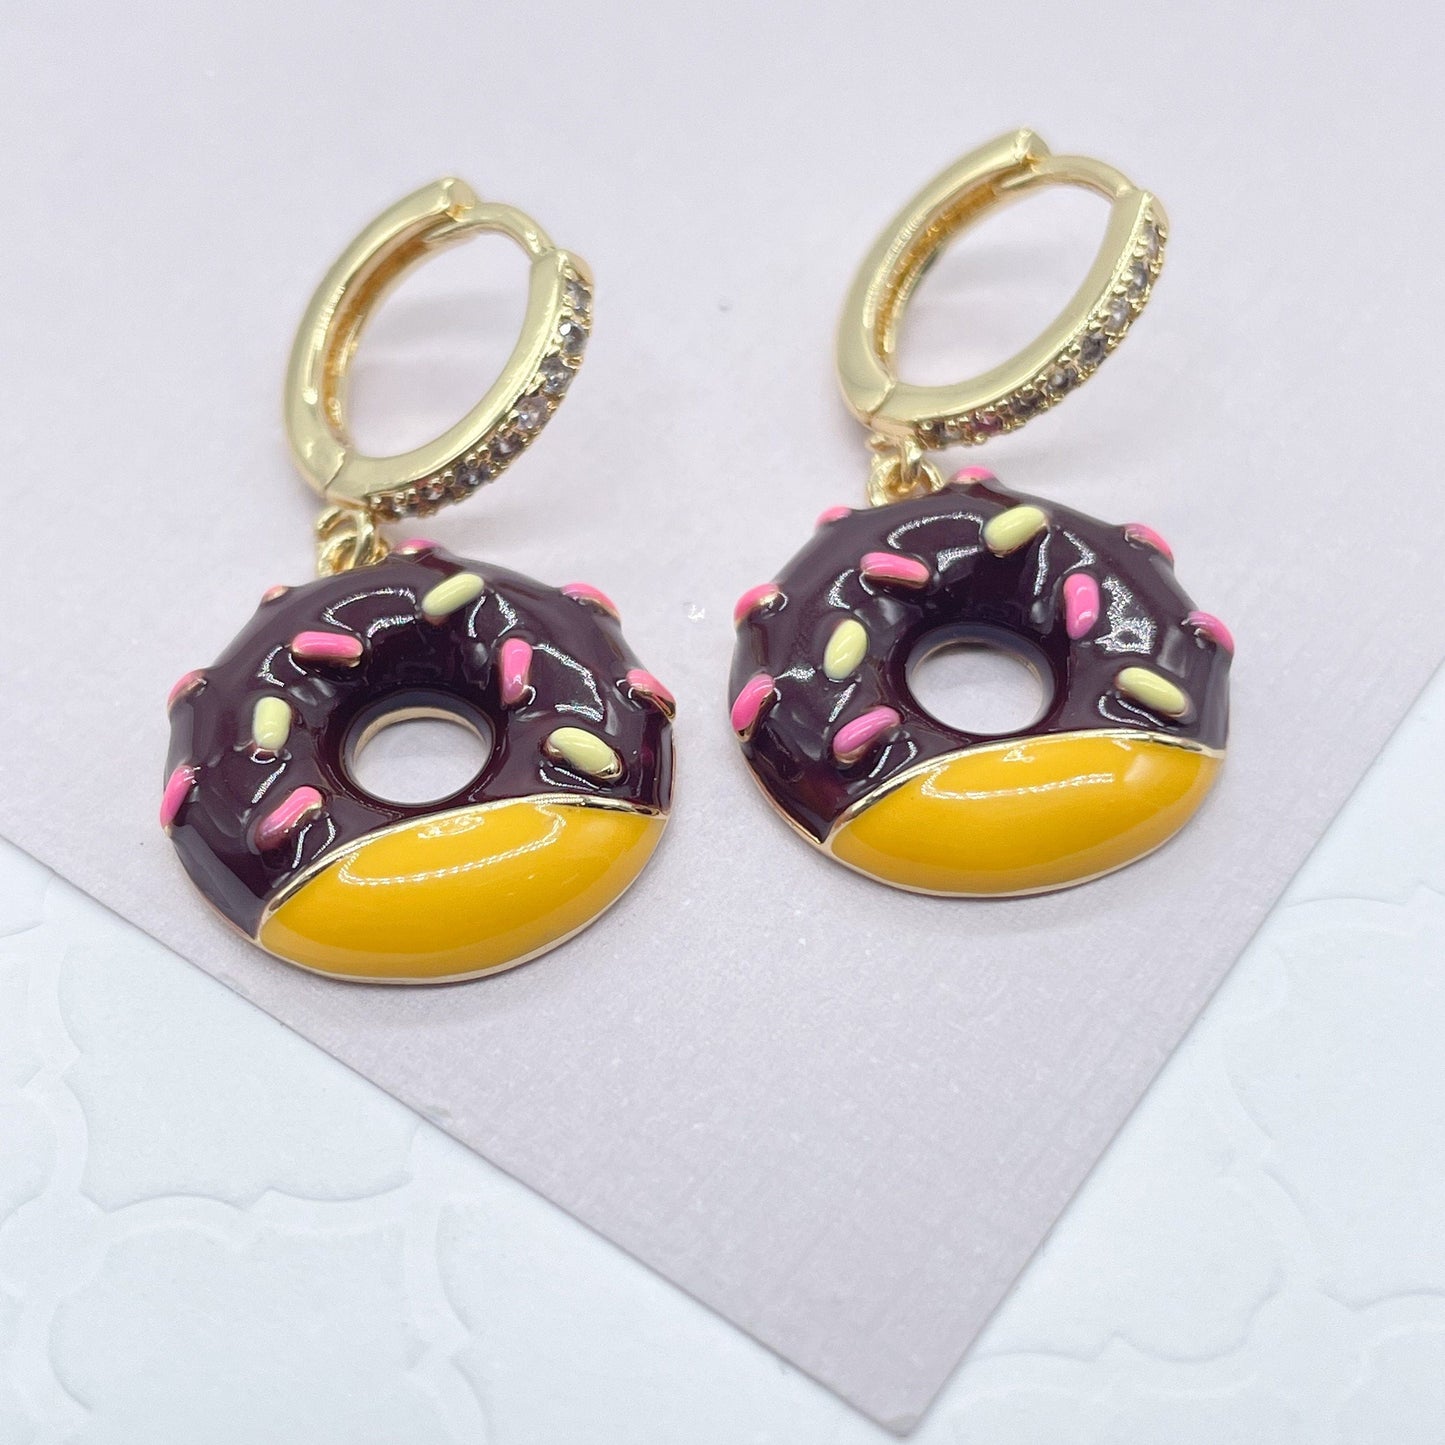 18K Gold Filled Colorful Donut Earrings Available In Different Colors And Tastes